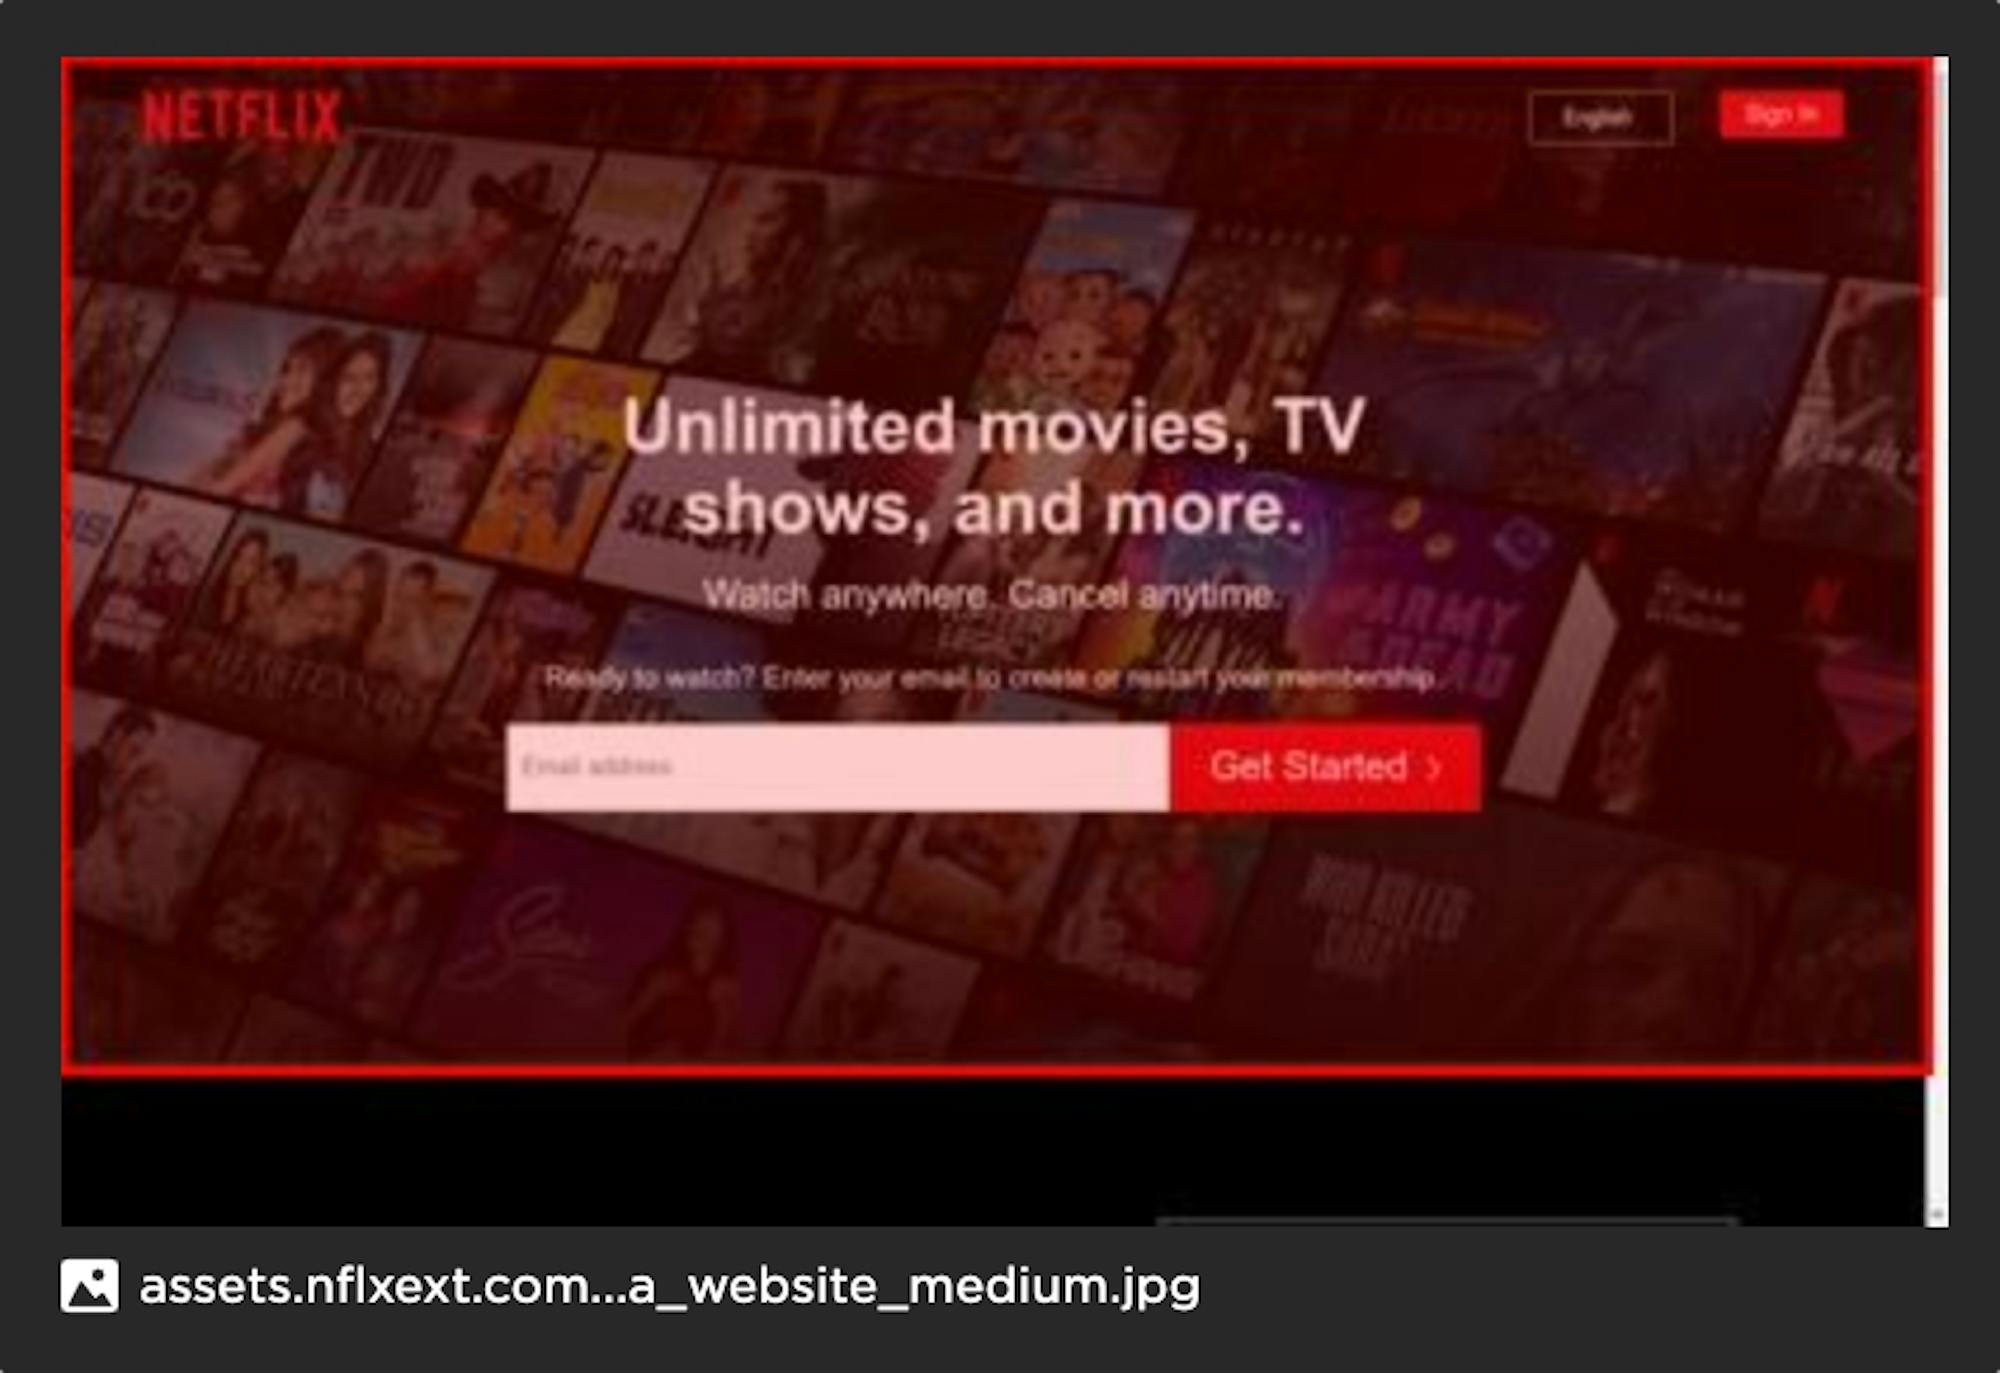 Image of Netflix website with highlighted LCP